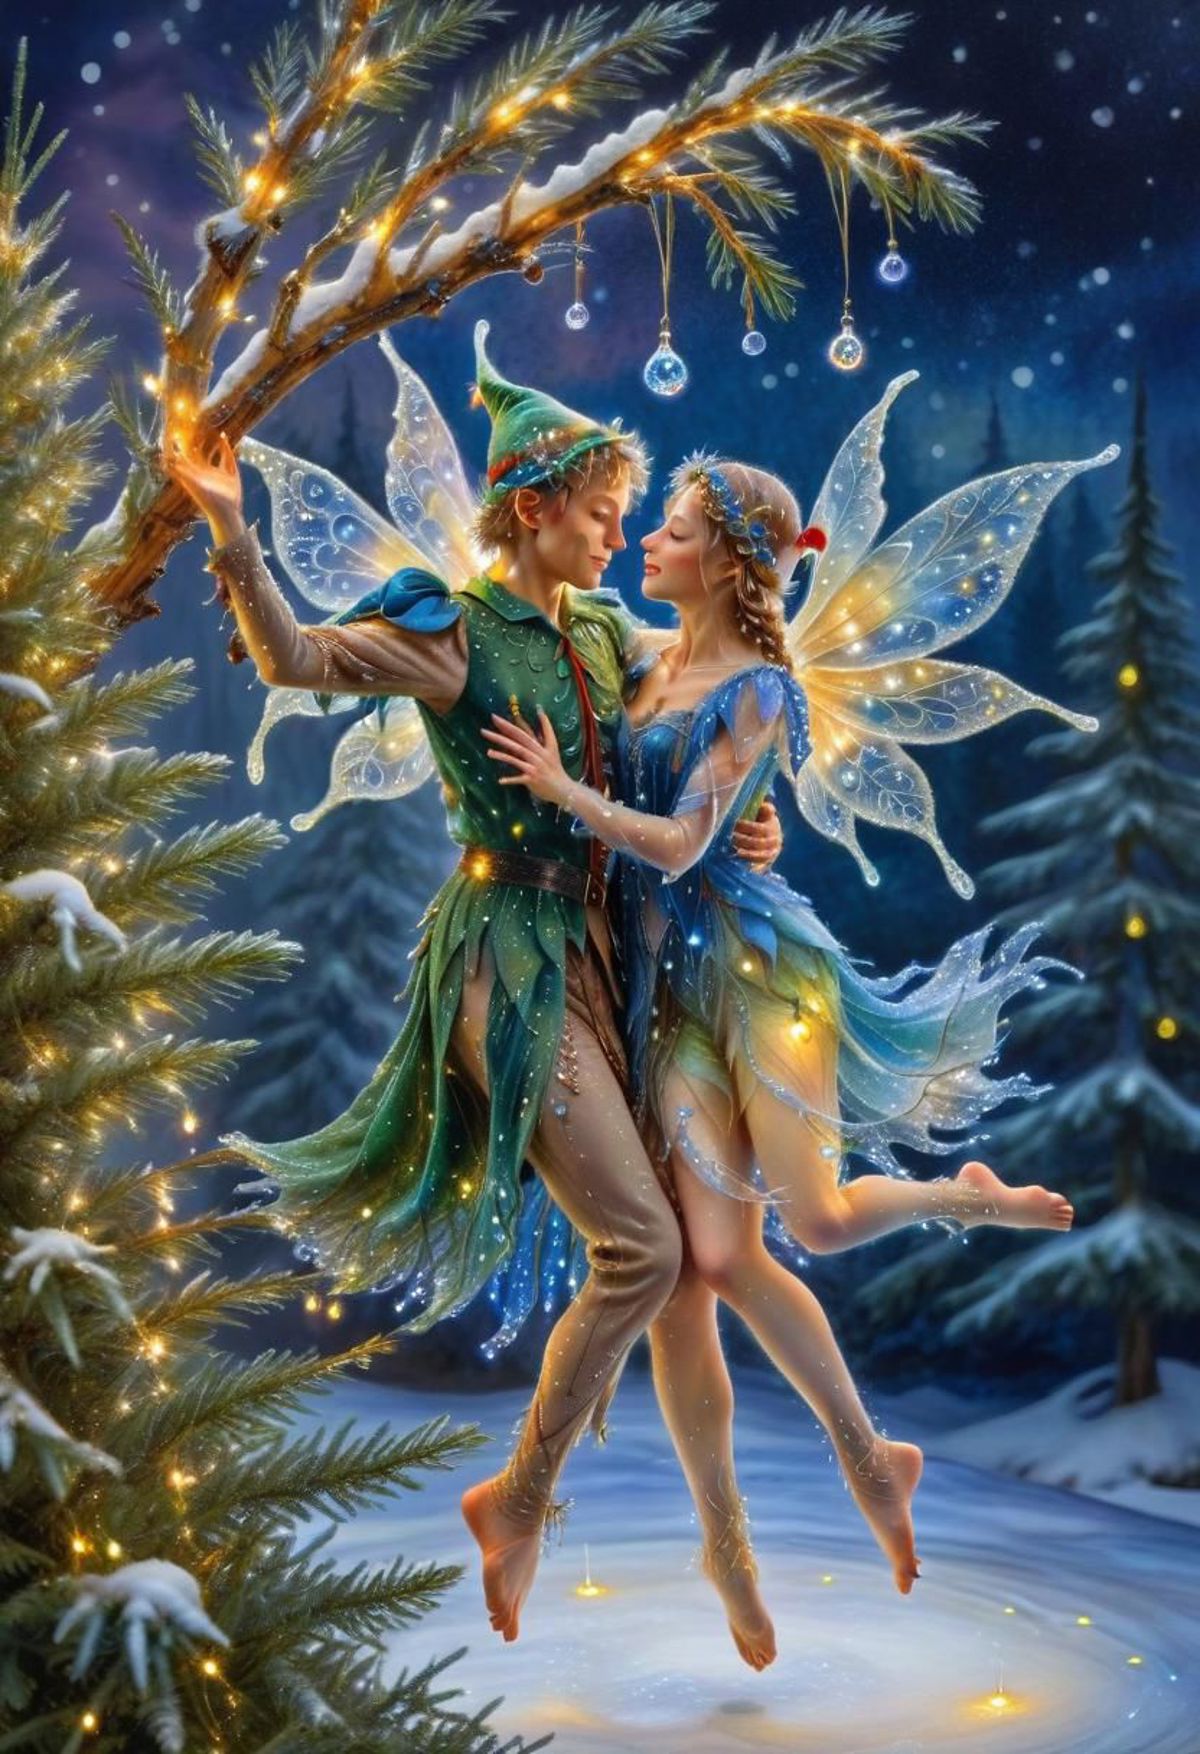 A painting of a fairy and a man dancing together on a snowy night under a Christmas tree.